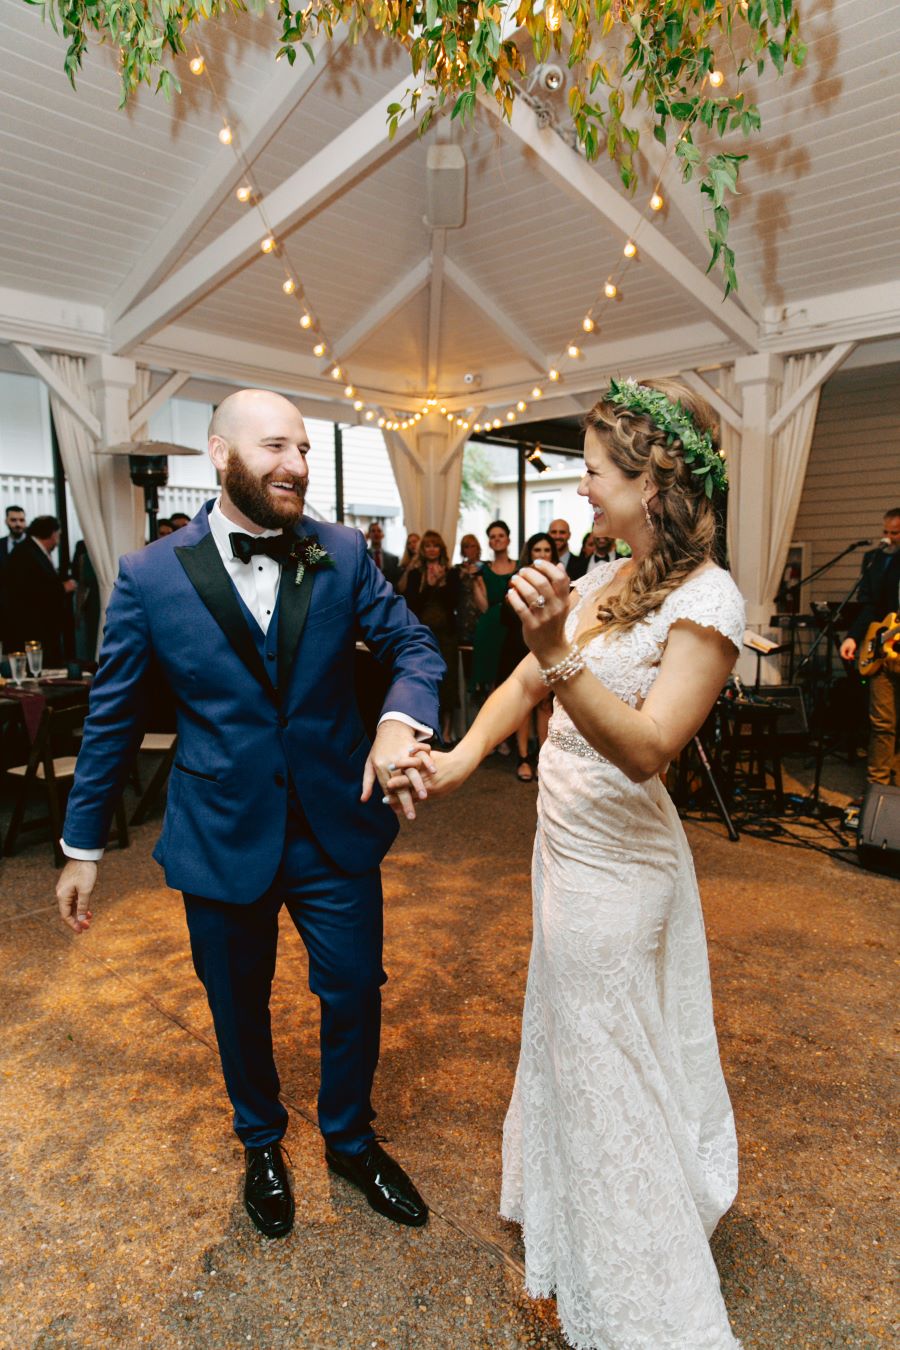 Bride and groom having first dance under leafy chandelier / earthy / fall / October / burgundy